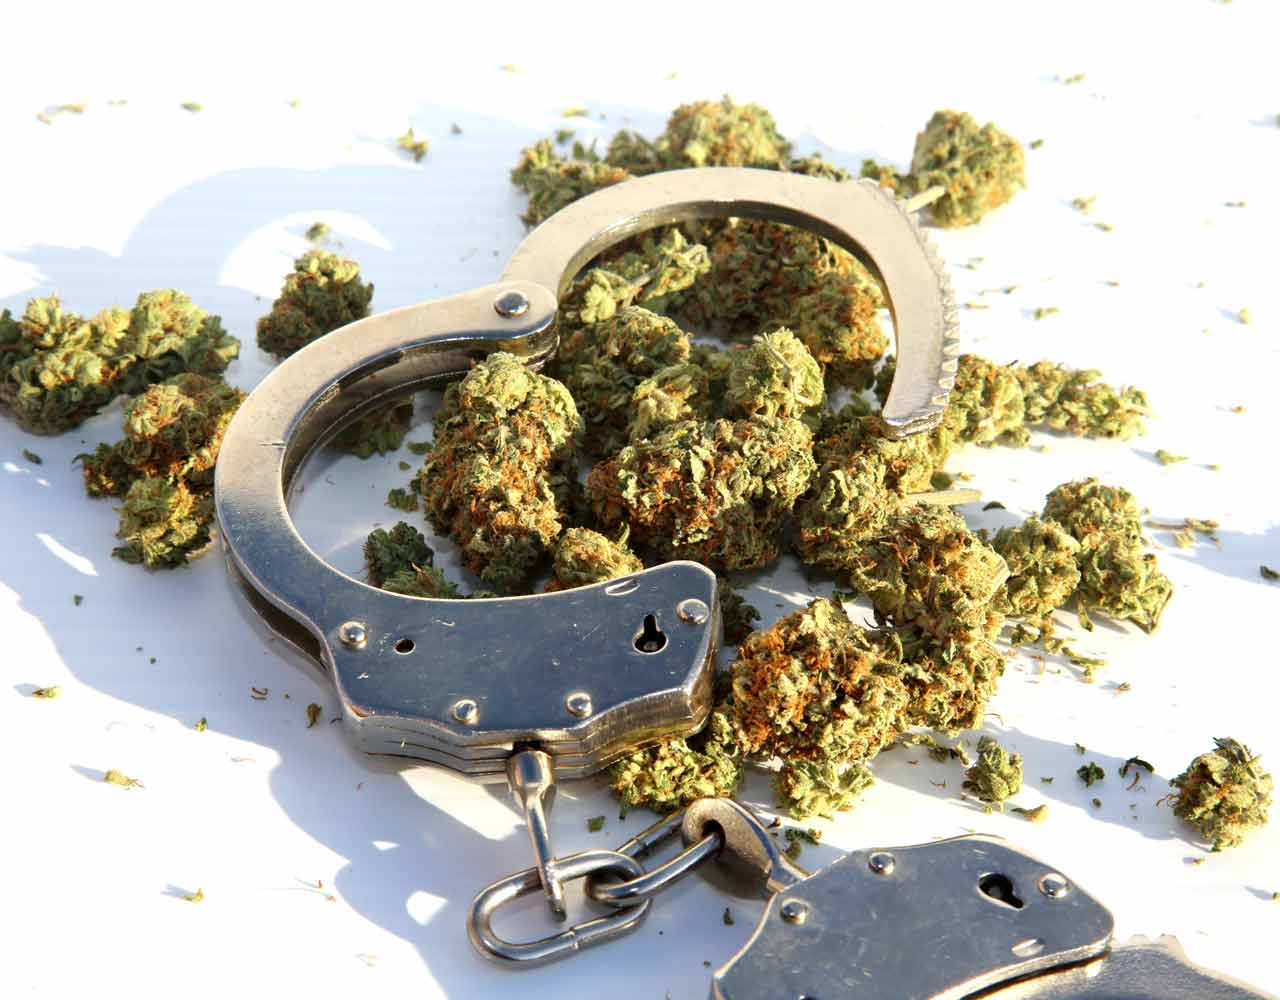 What happens if i get caught with a small amount of marijuana?